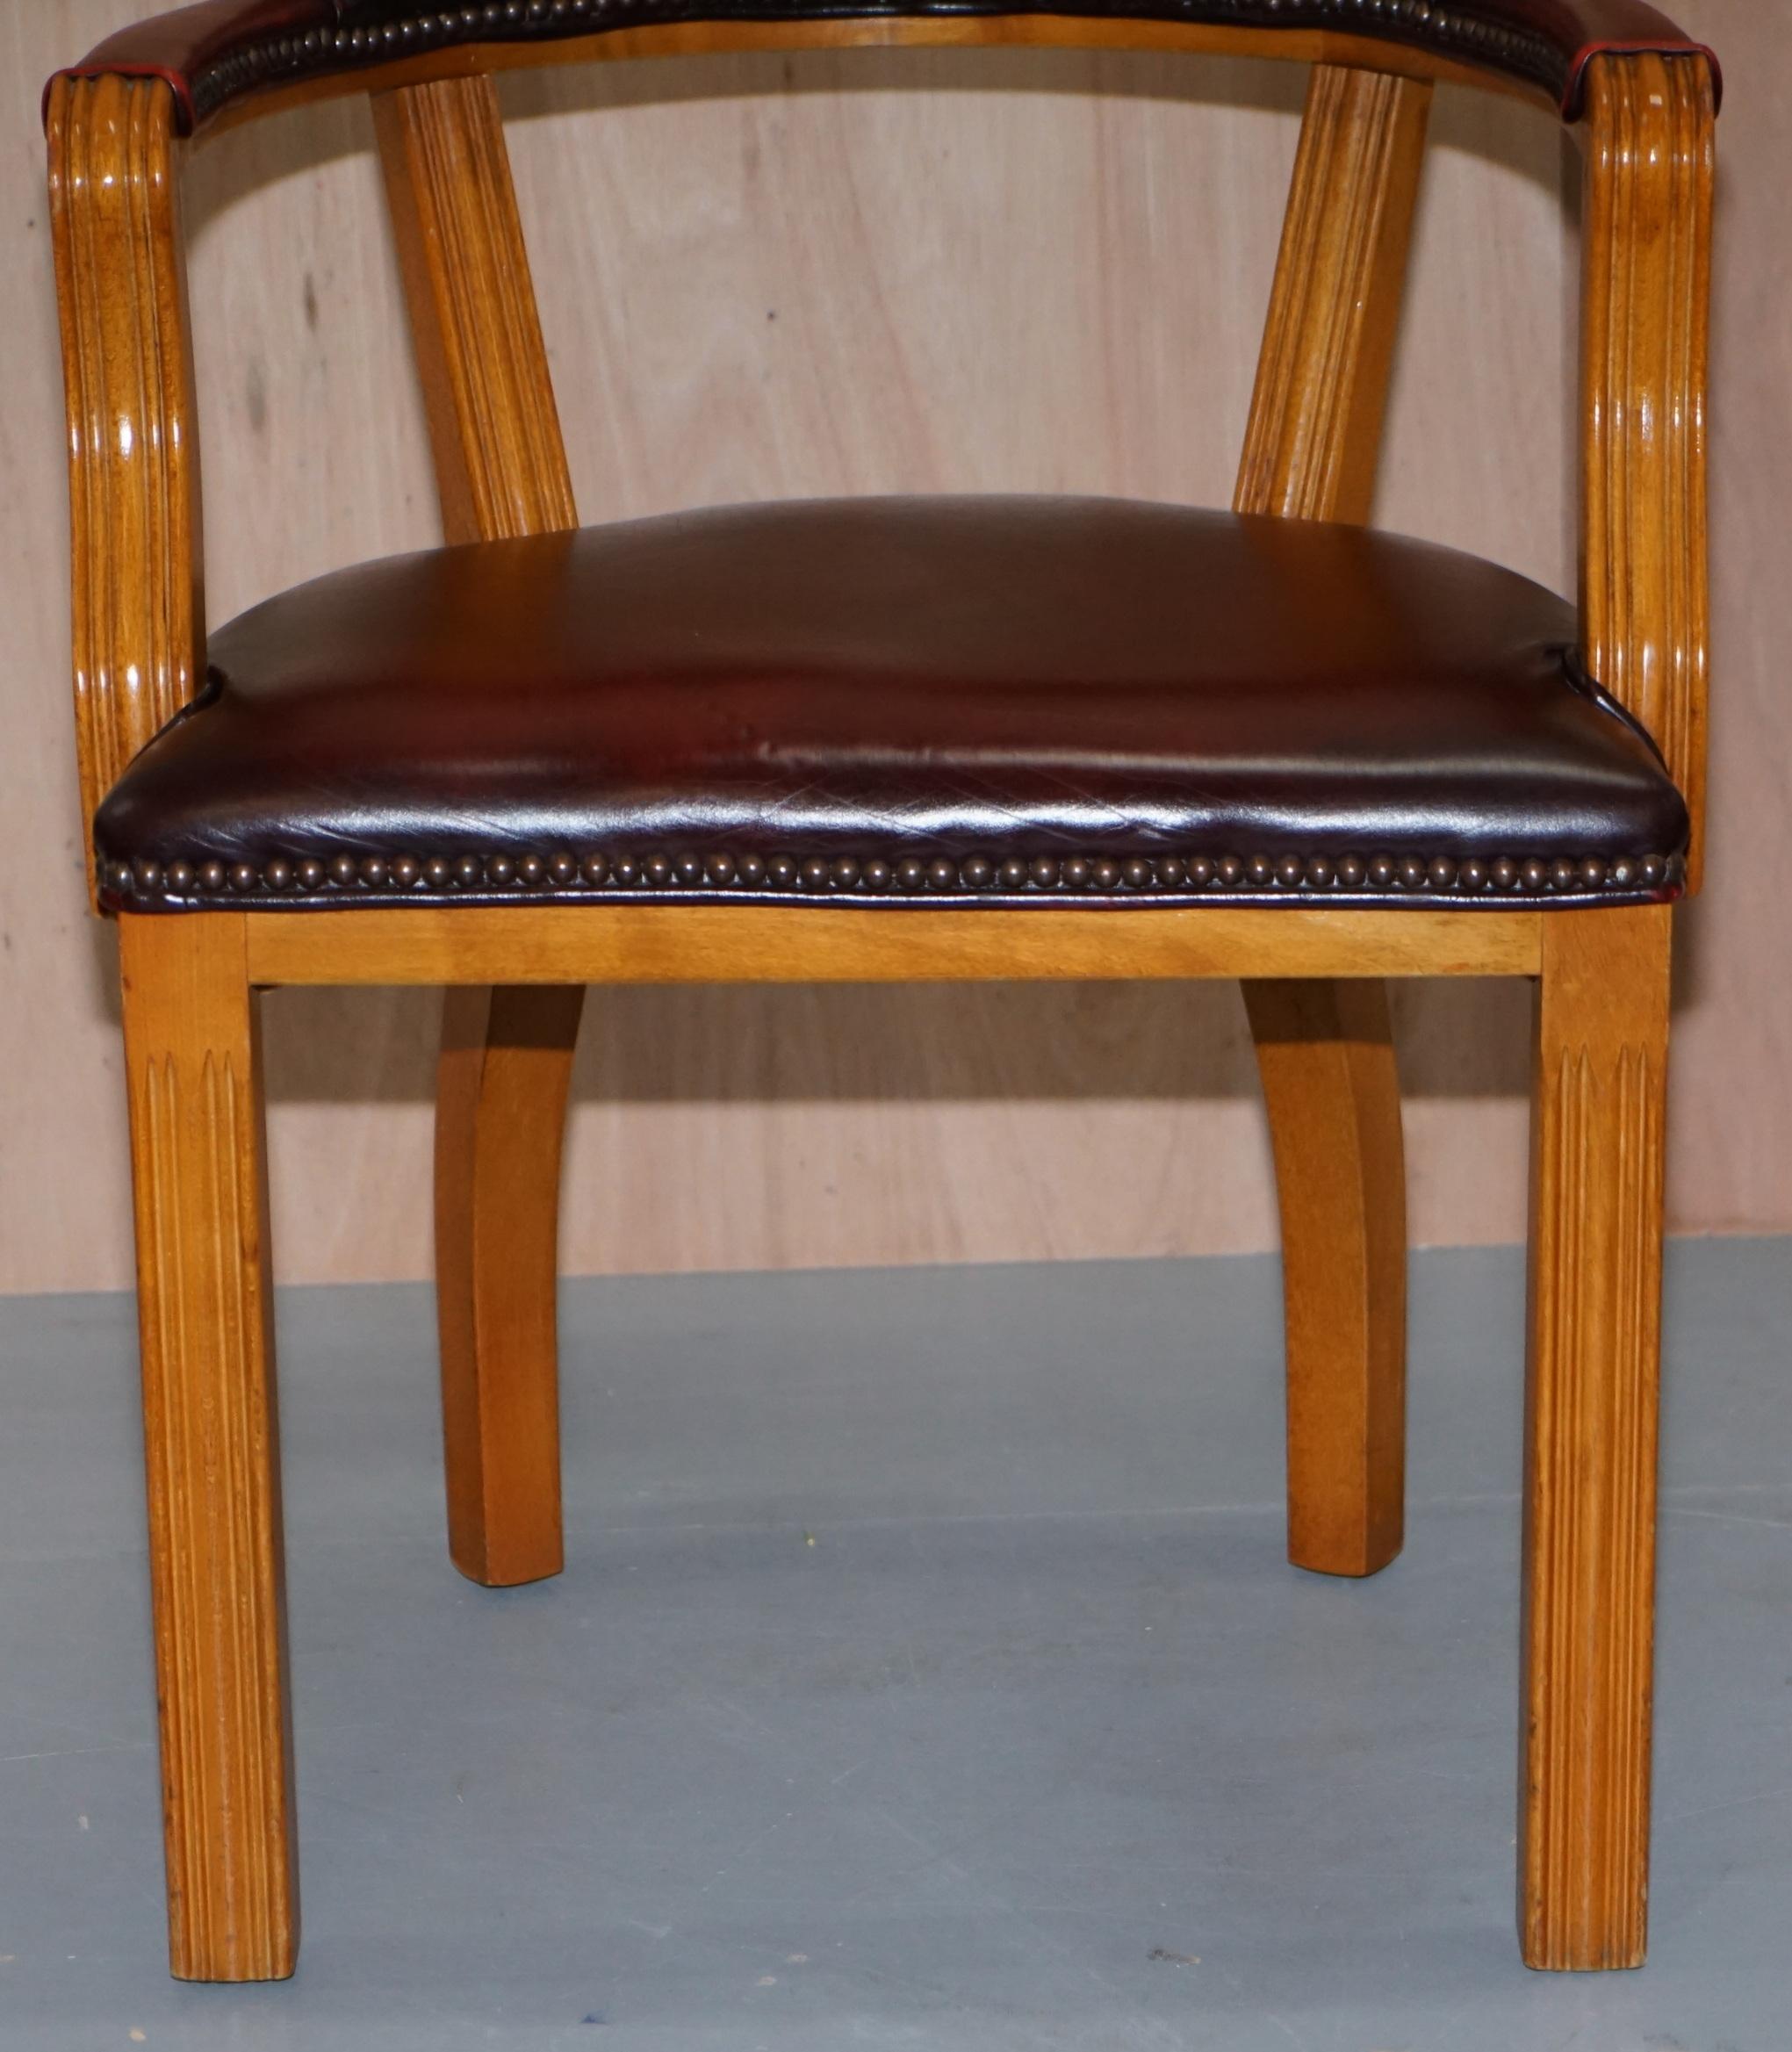 1 of 2 Oxblood Leather House of Chesterfield Court Office Chairs 2